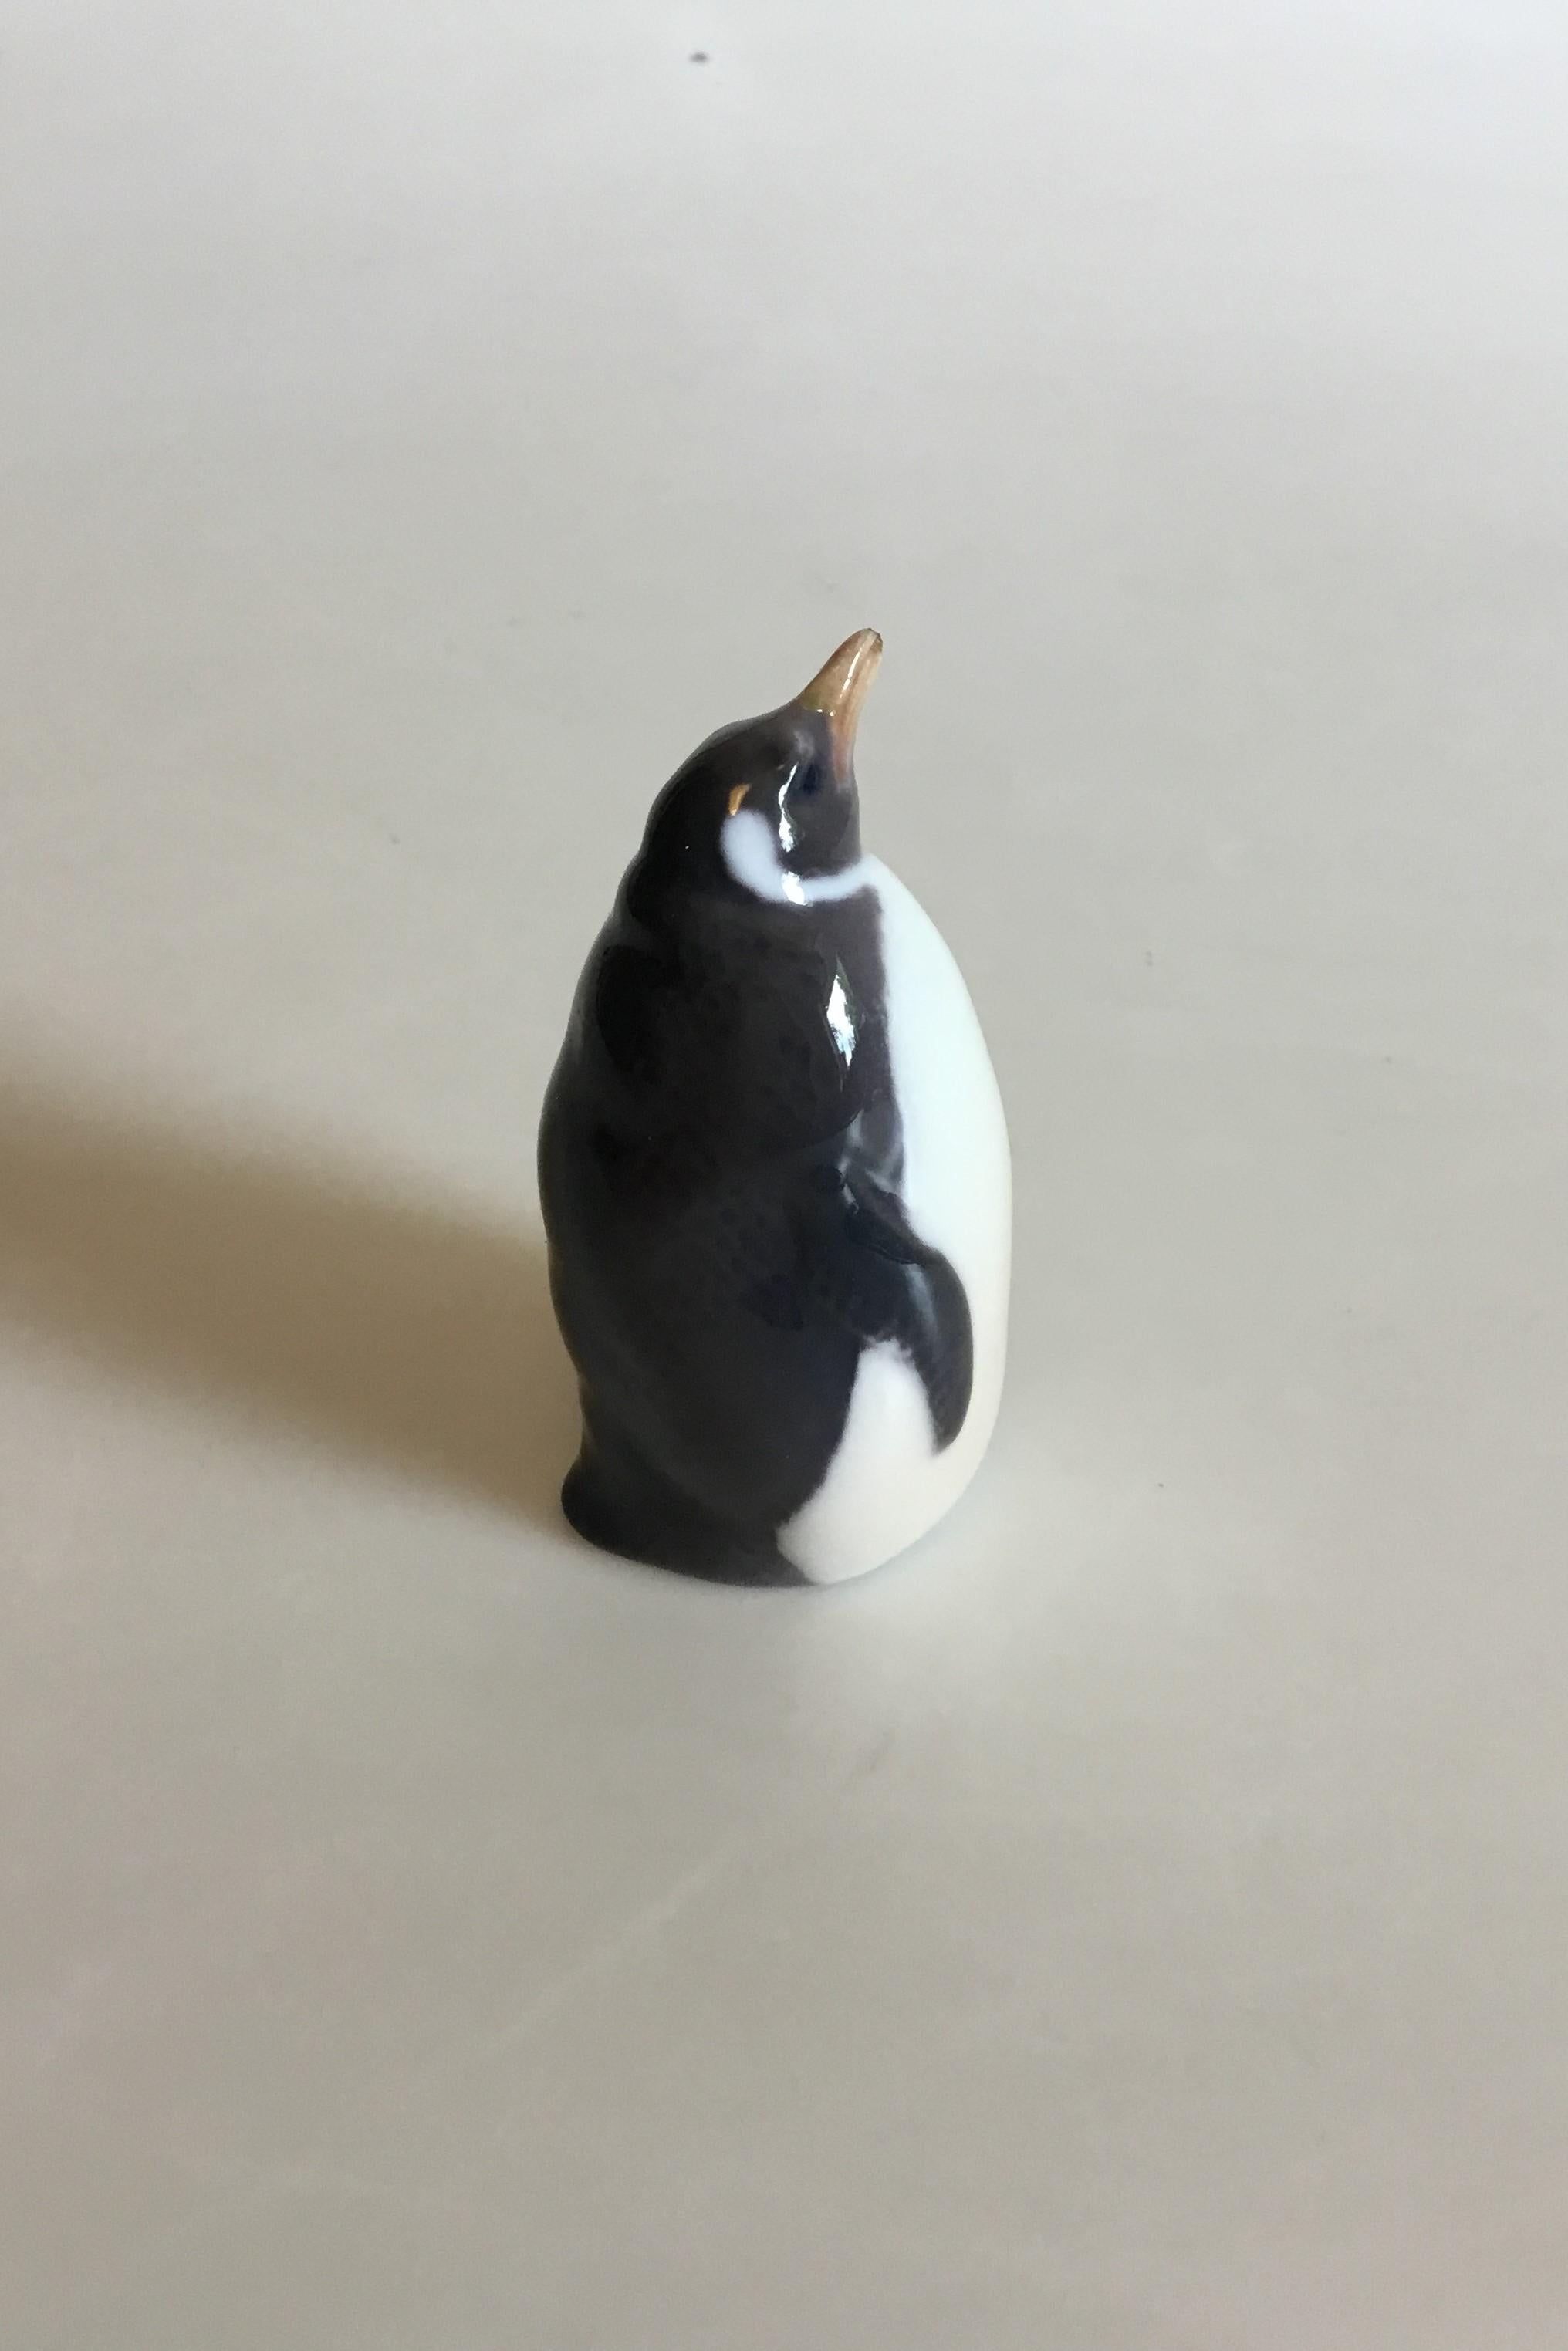 Royal Copenhagen Figurine Pinguin No 3003. Measures 7 cm / 2 3/4 in. and is in good condition. Designed by Theodor Madsen.